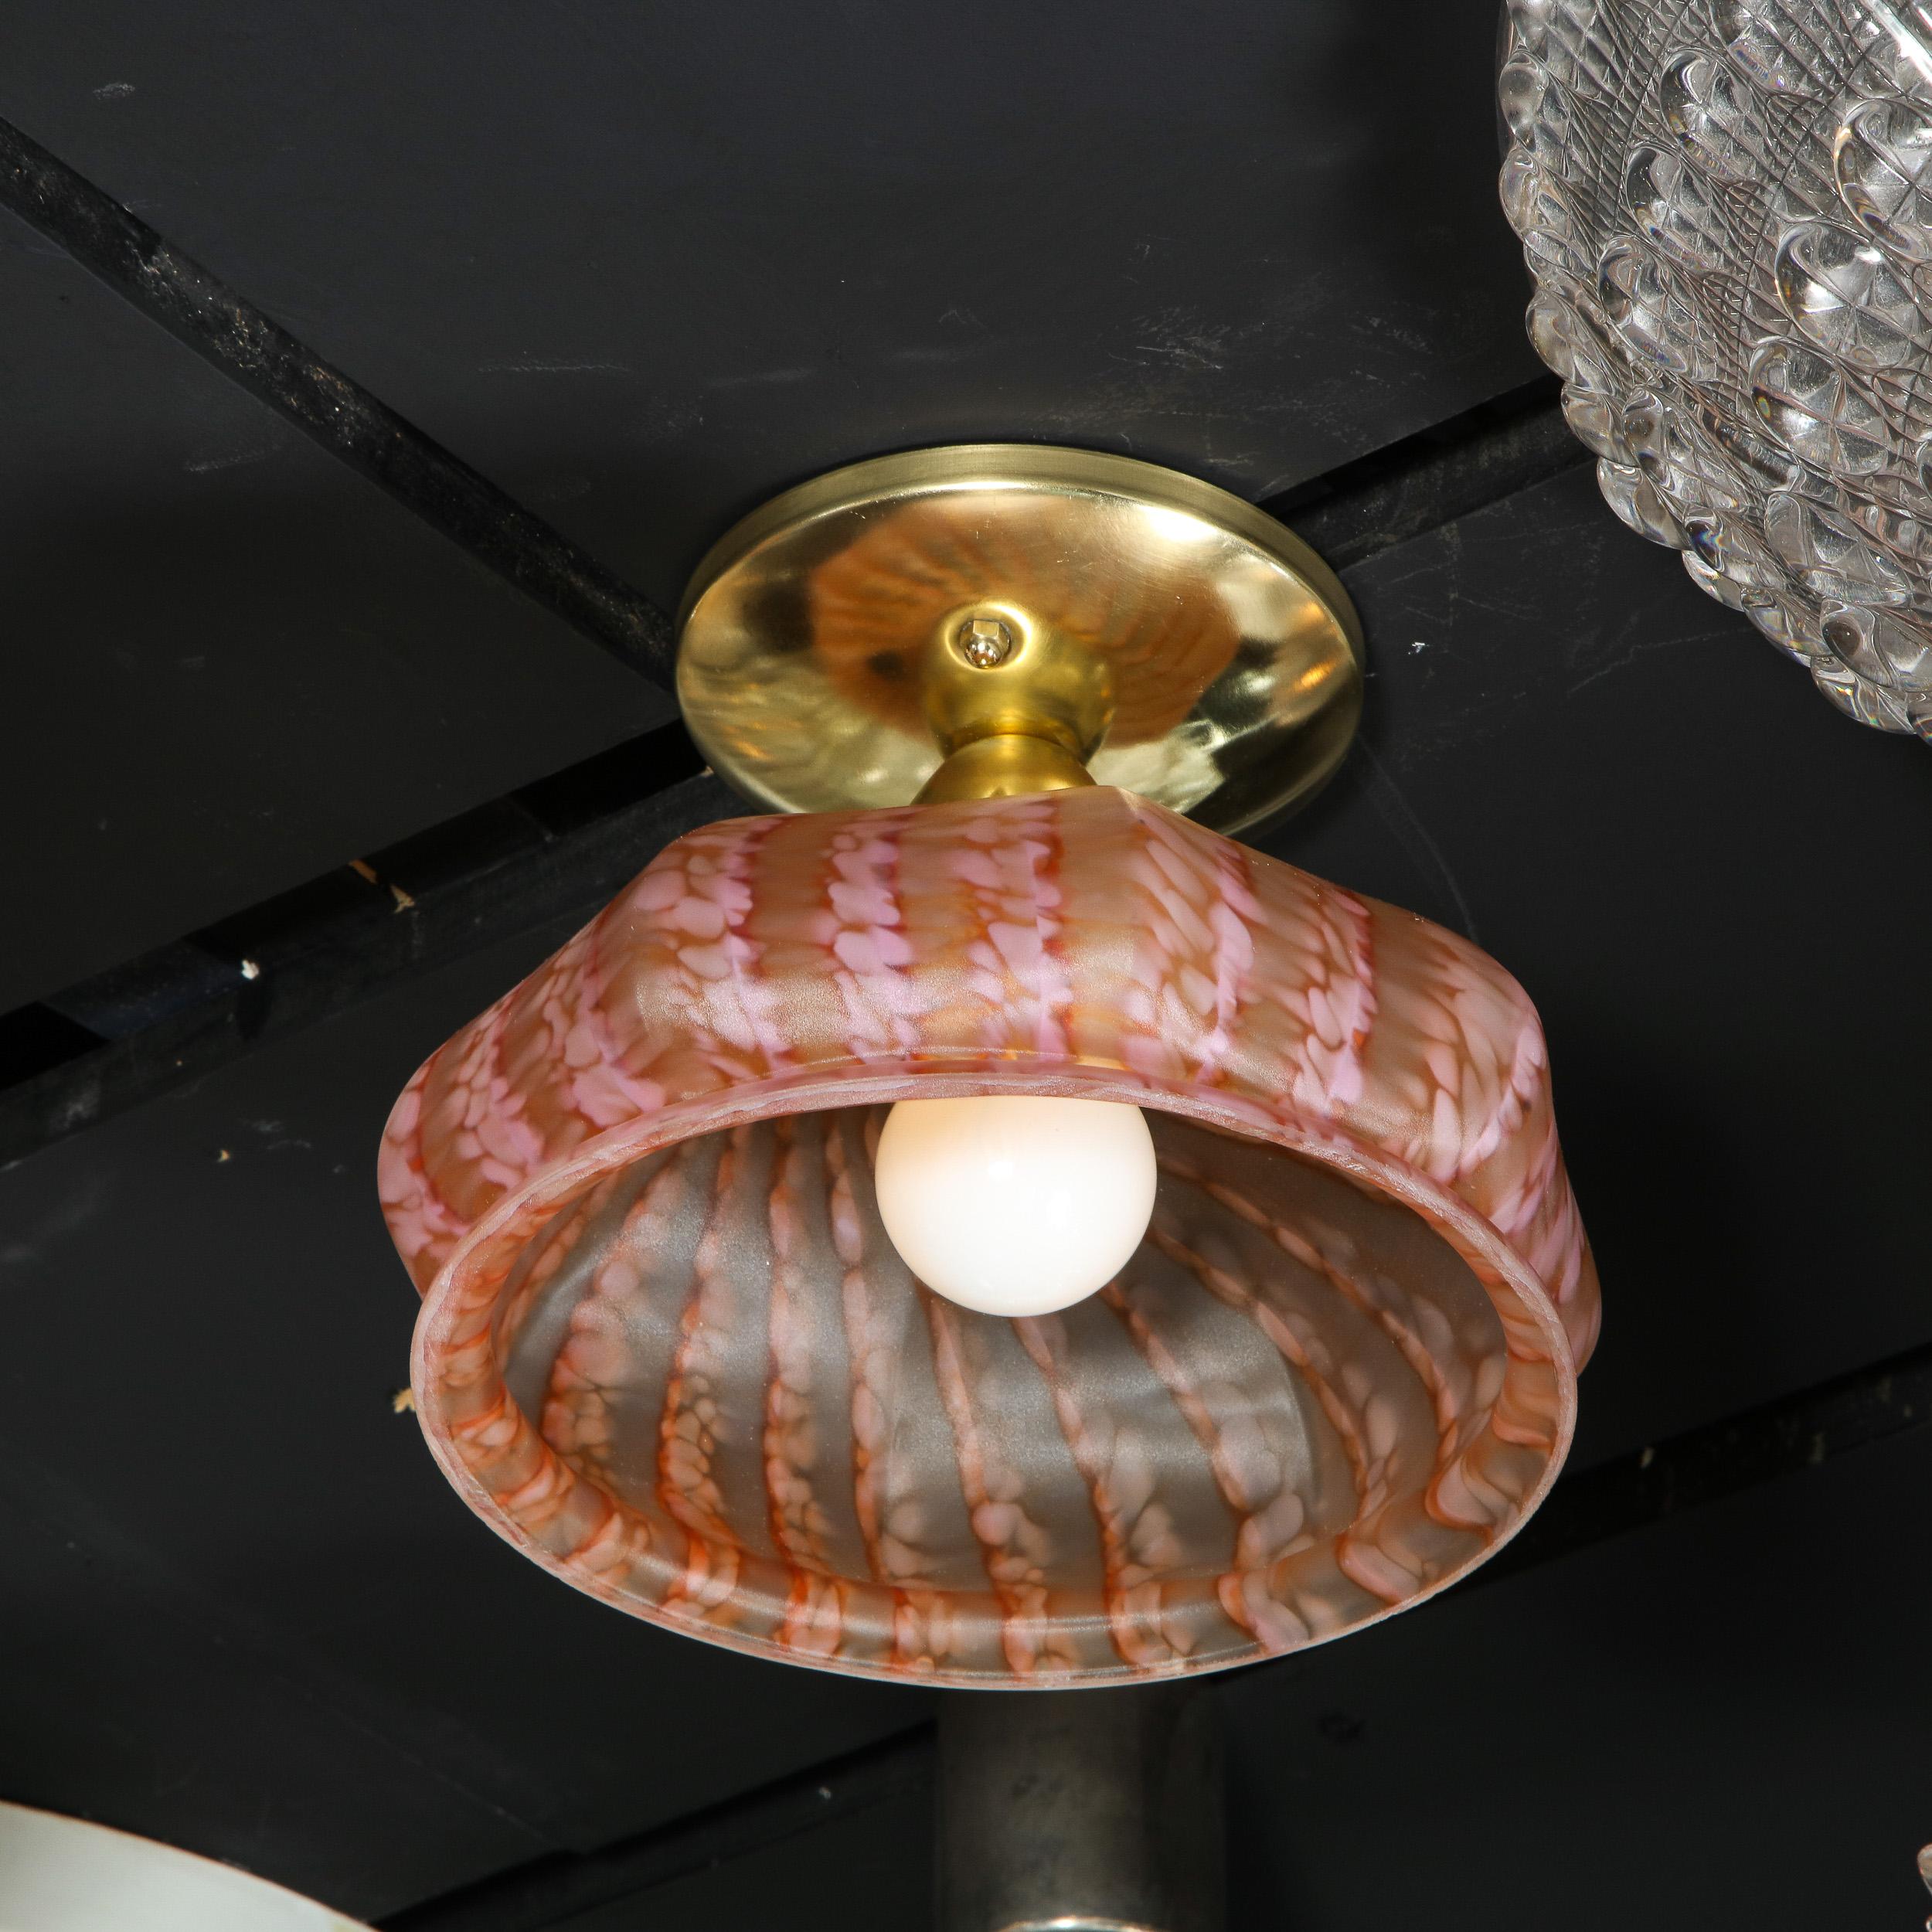 This refined modernist flush mount was realized in Murano, Italy- the island off the coast of Venice renowned for centuries for its superlative glass production- during the 20th century. It features a billowing convex shade in mottled striated